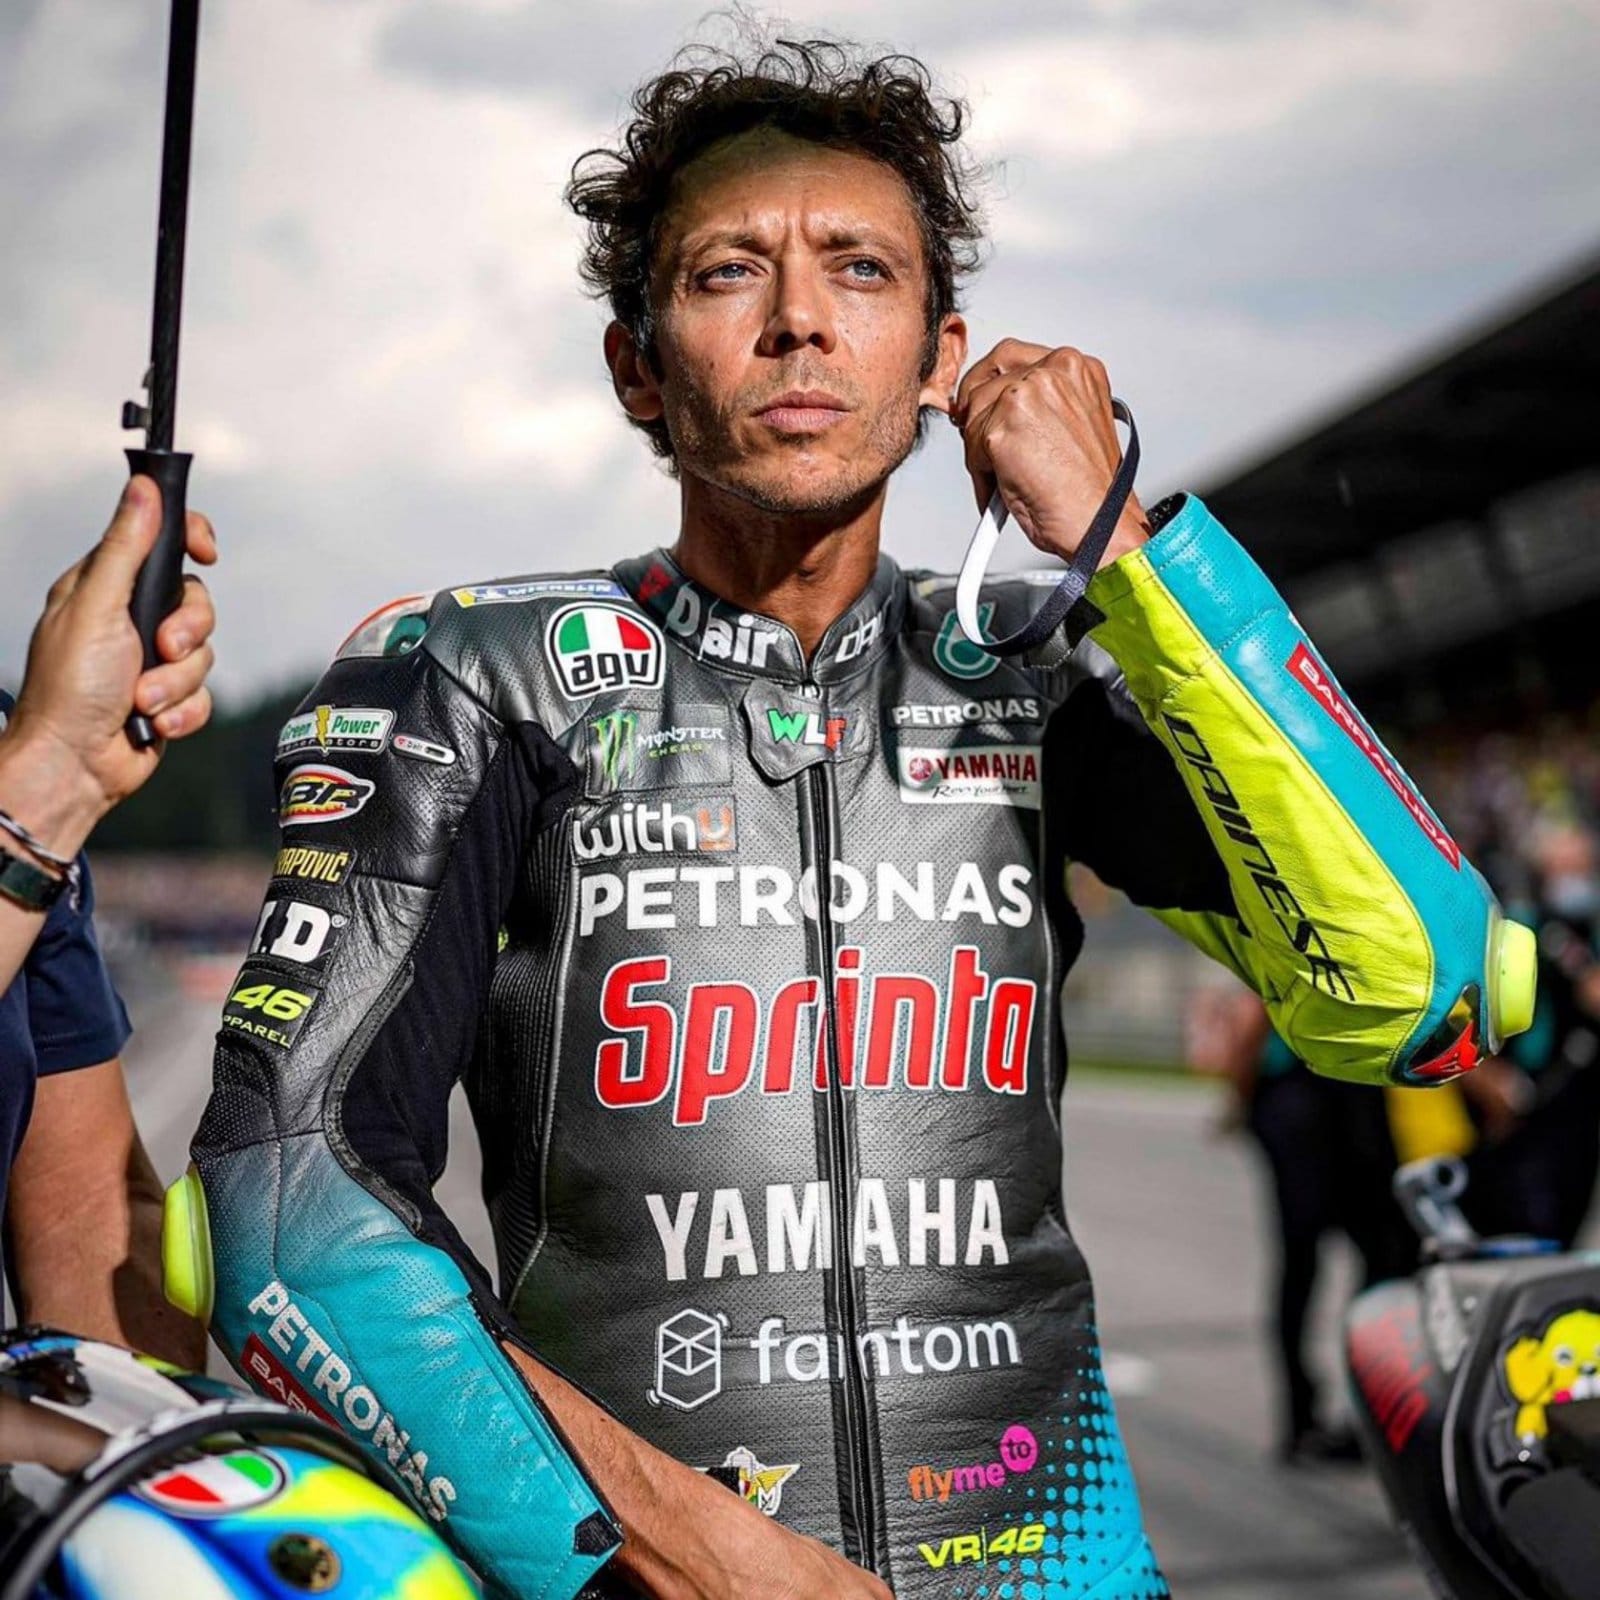 Valentino Rossi is retiring from motorcycle racing